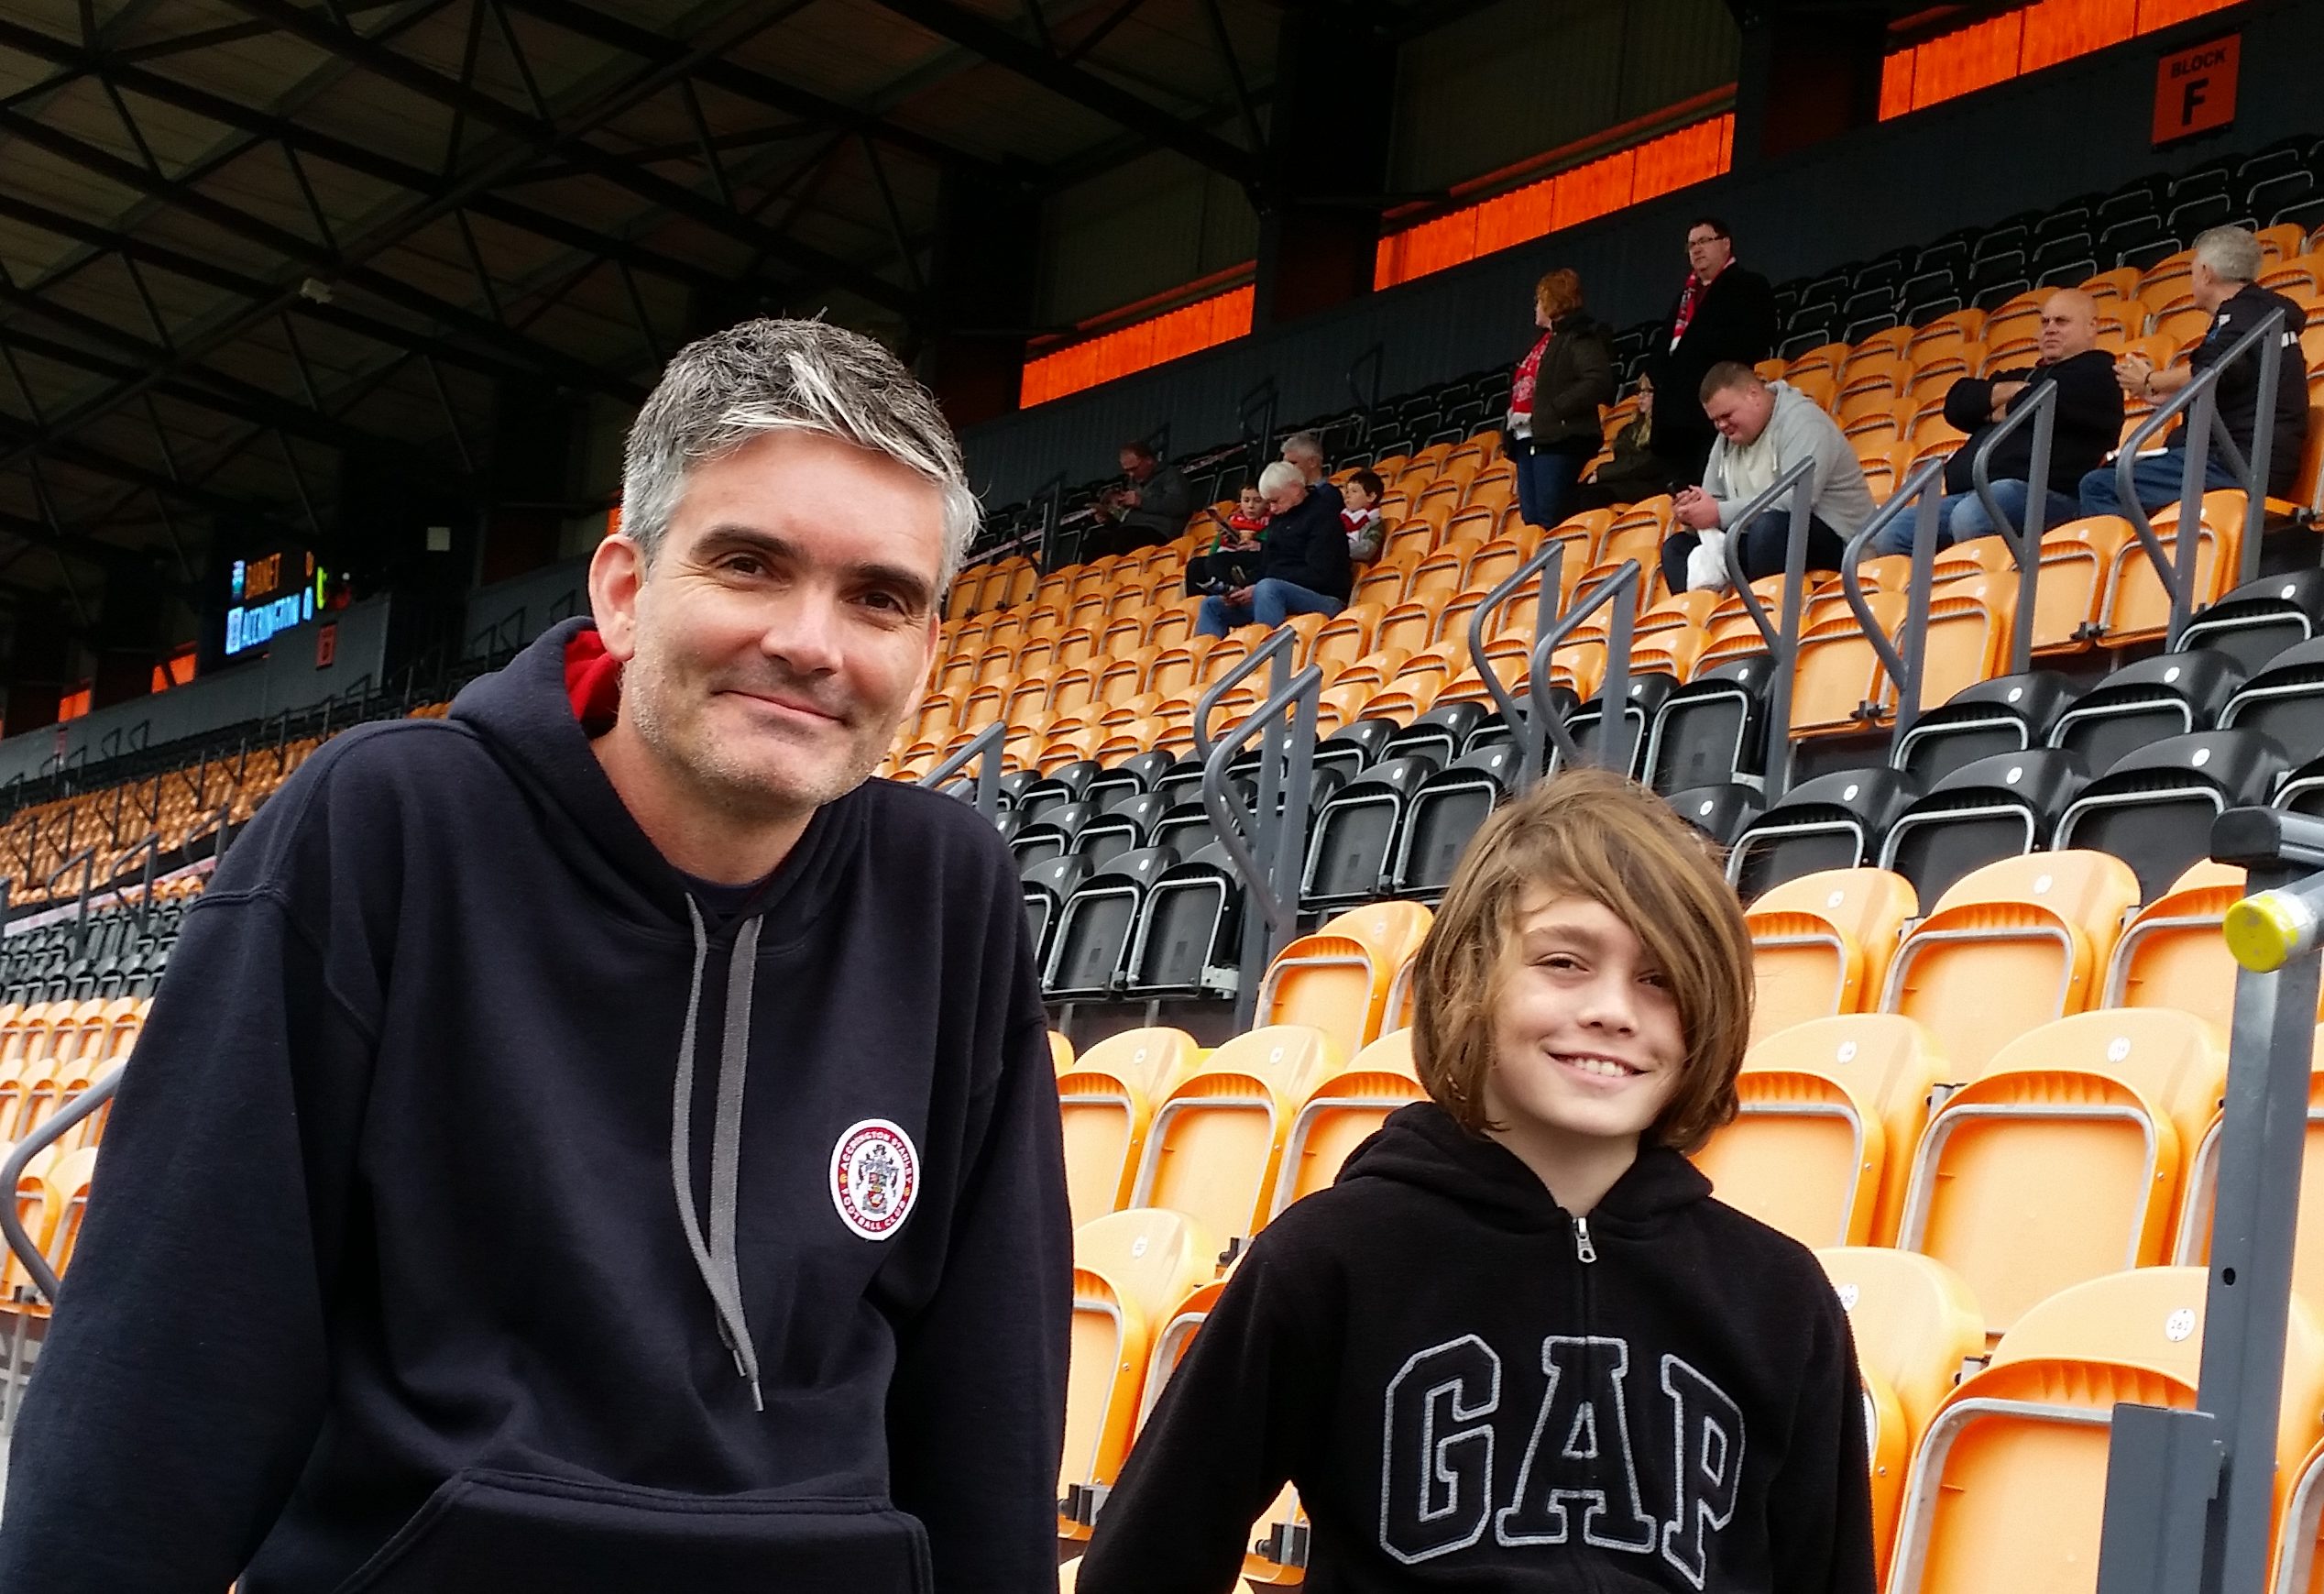 Mat Guy with his nephew, who accompanied him to a few games during his northern travels.